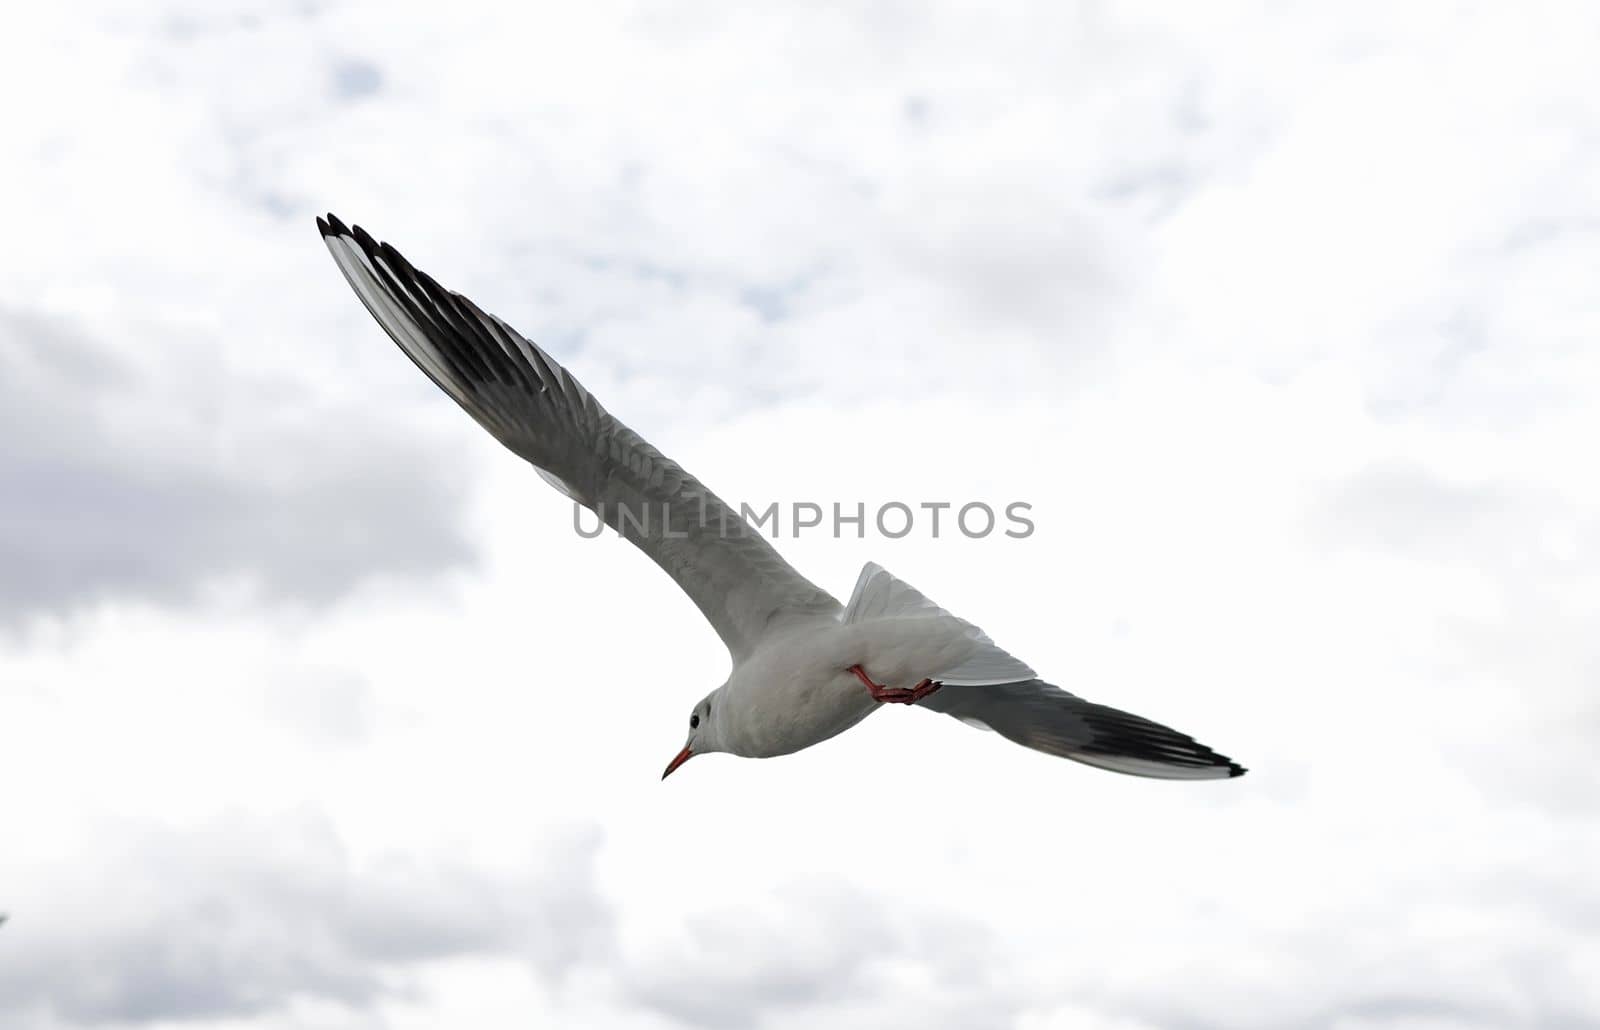 flying seagull with spread wings against a cloudy sky.